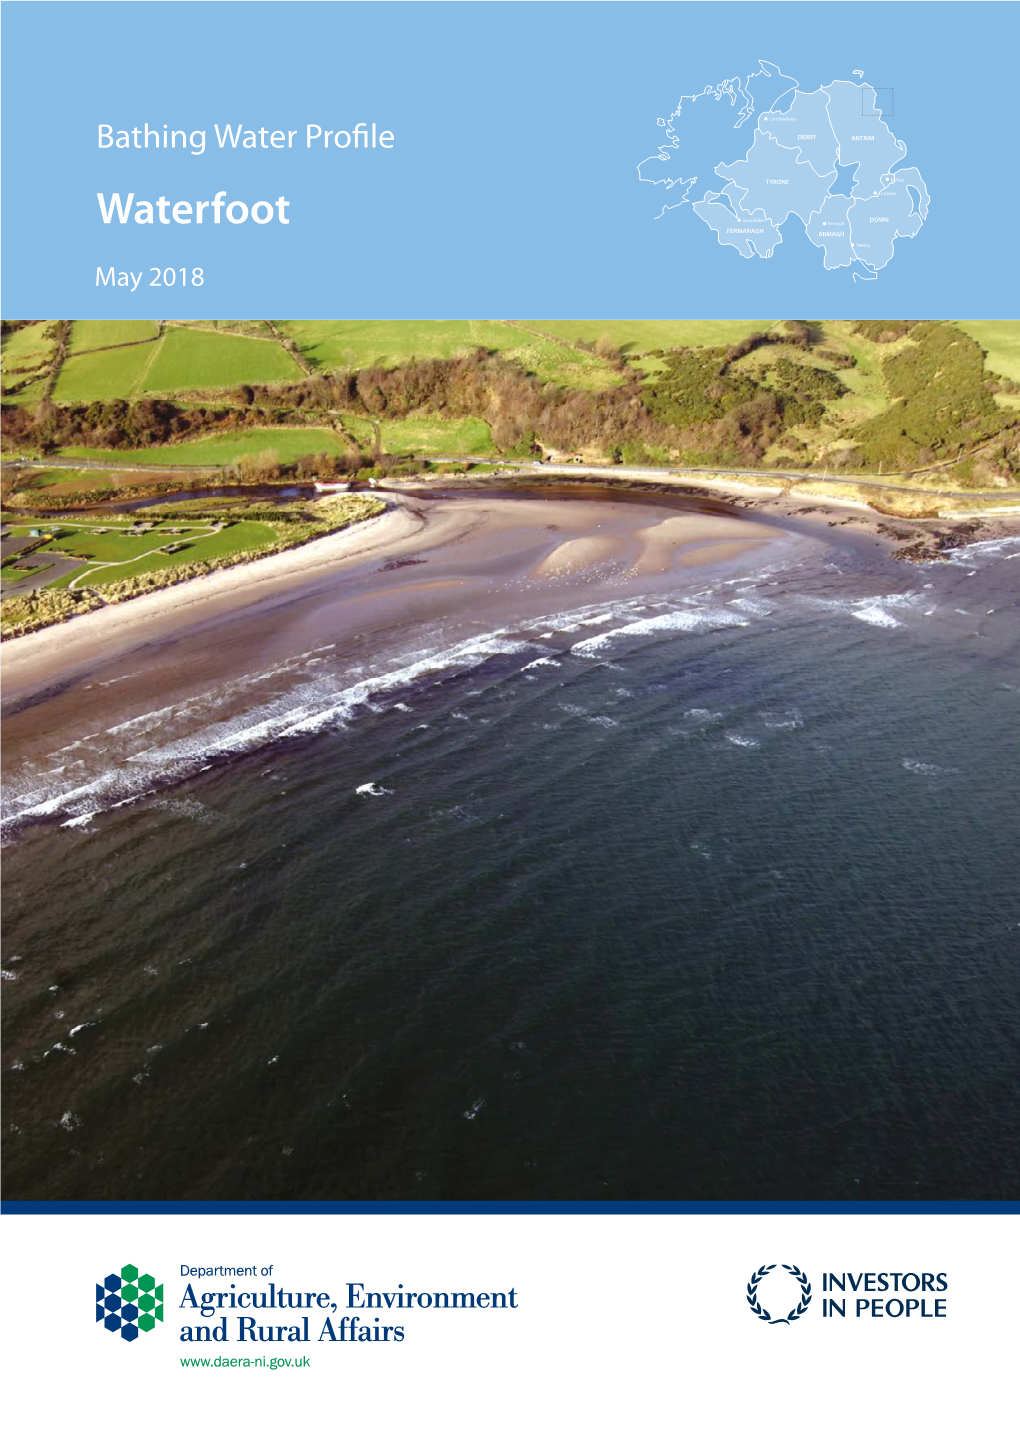 Download Waterfoot Bathing Water Profile Publication